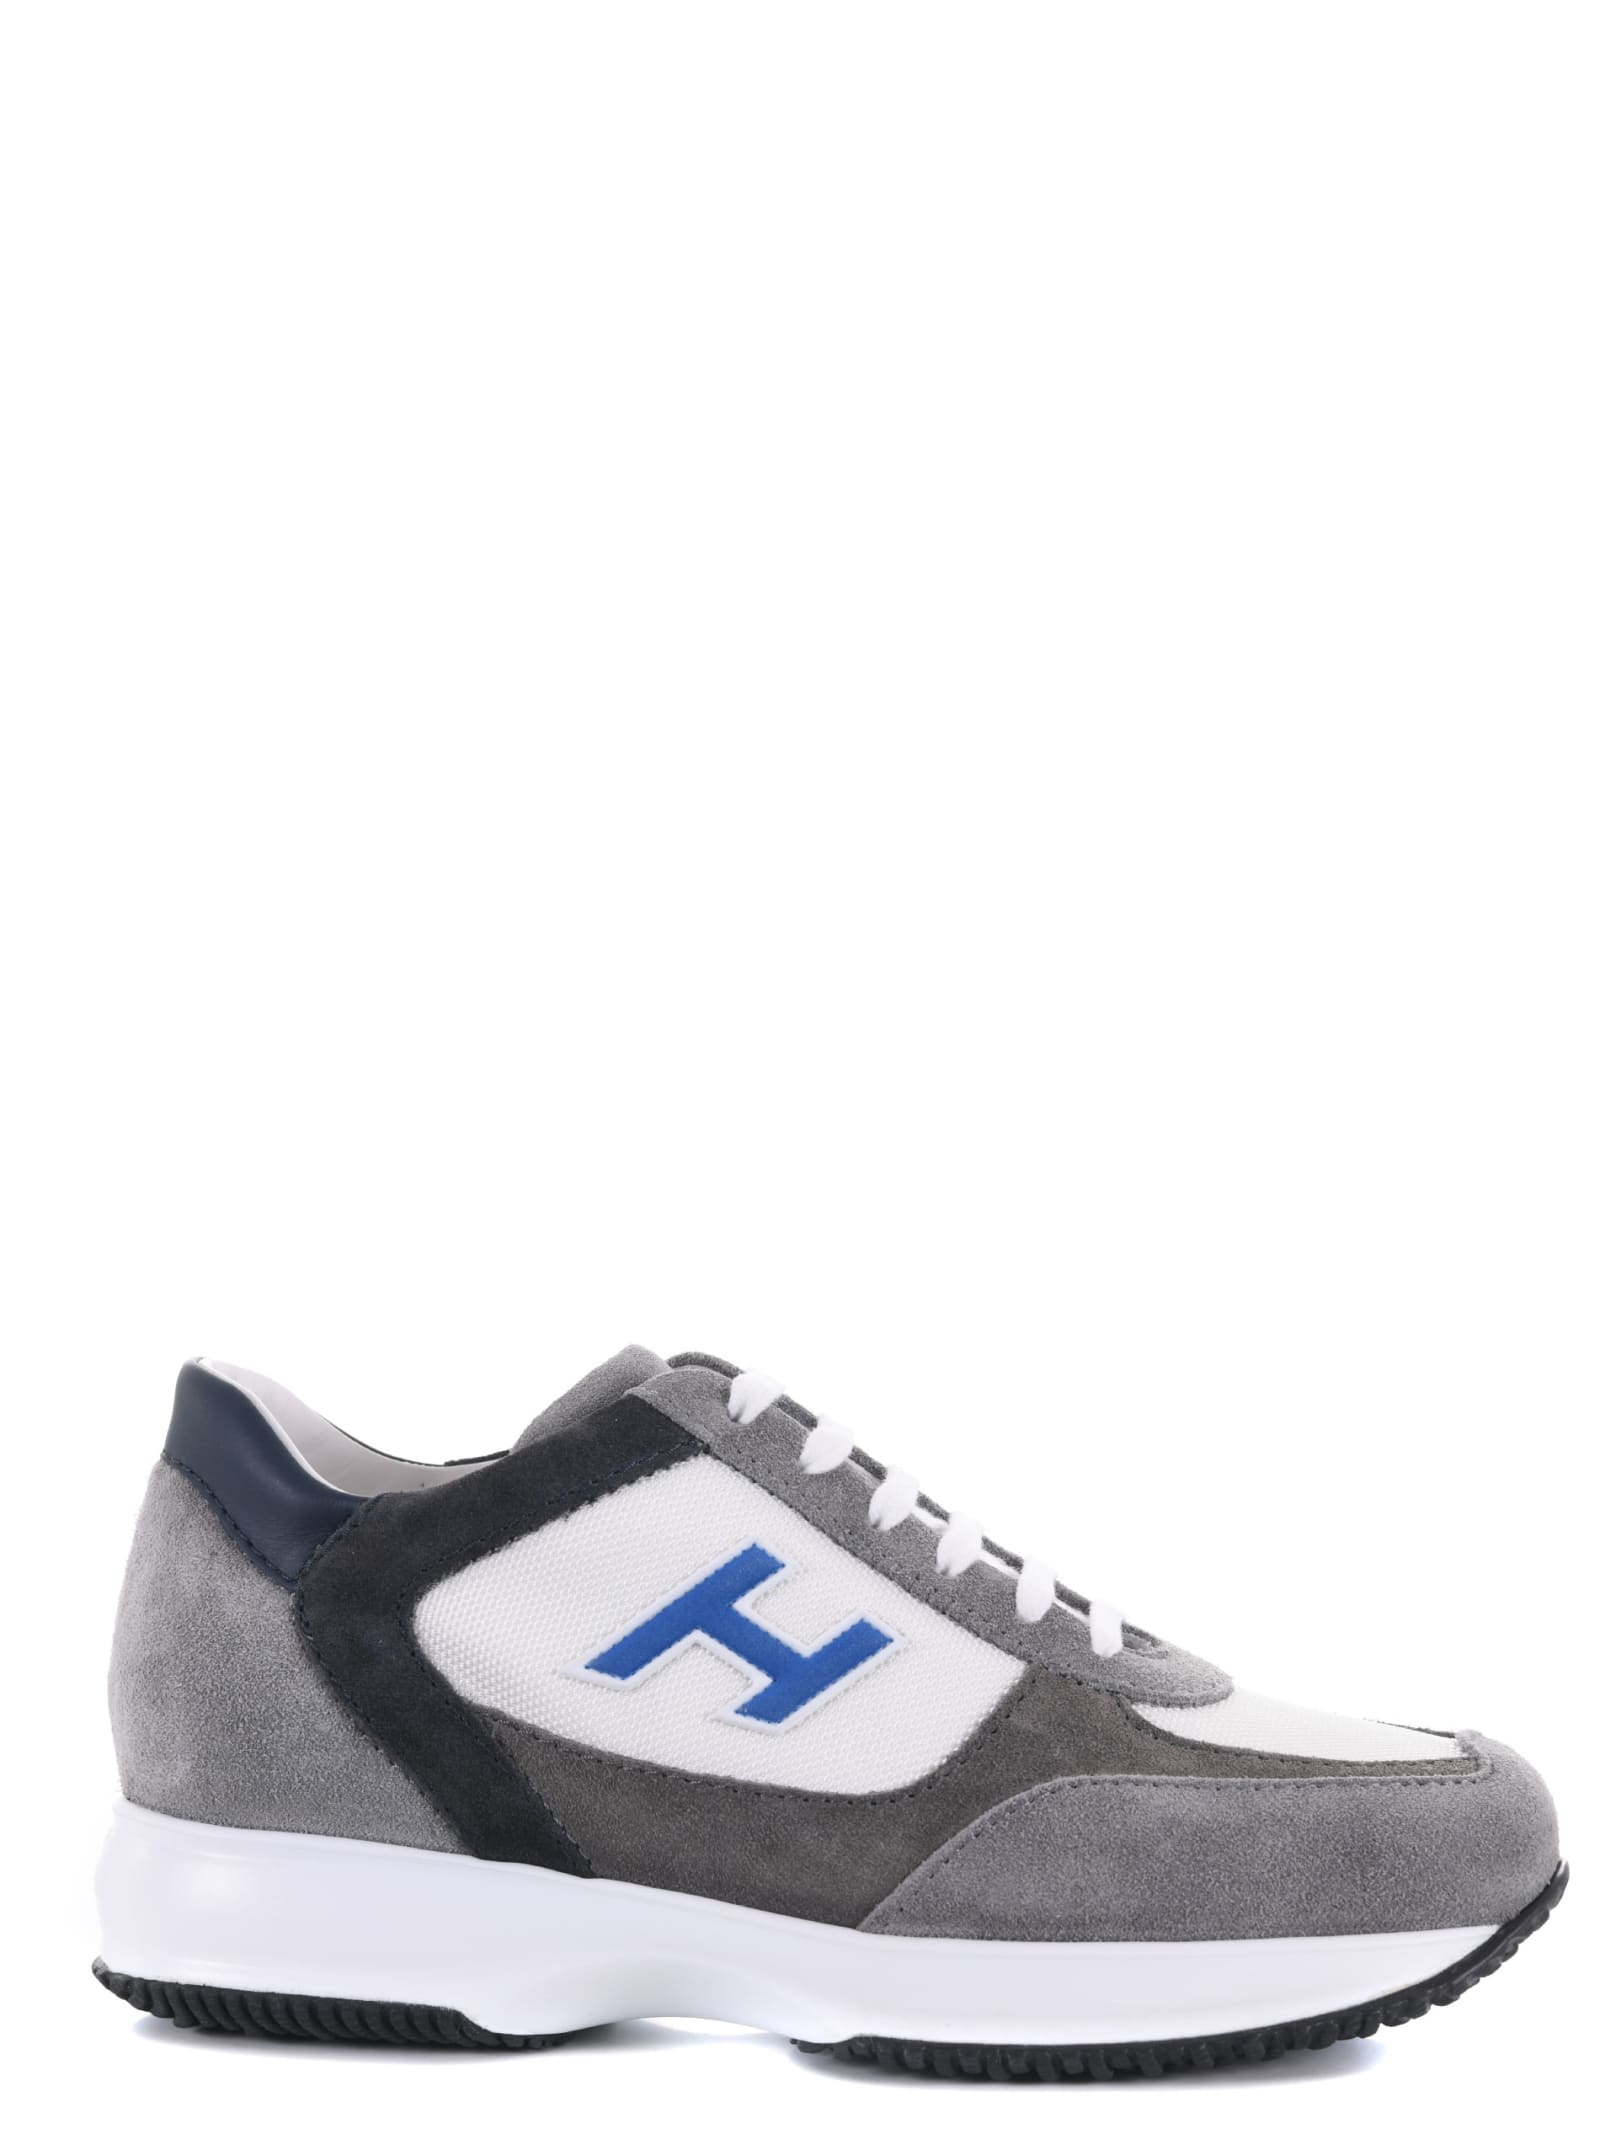 Hogan Sneakers In Suede And Nylon In Grigio/bianco